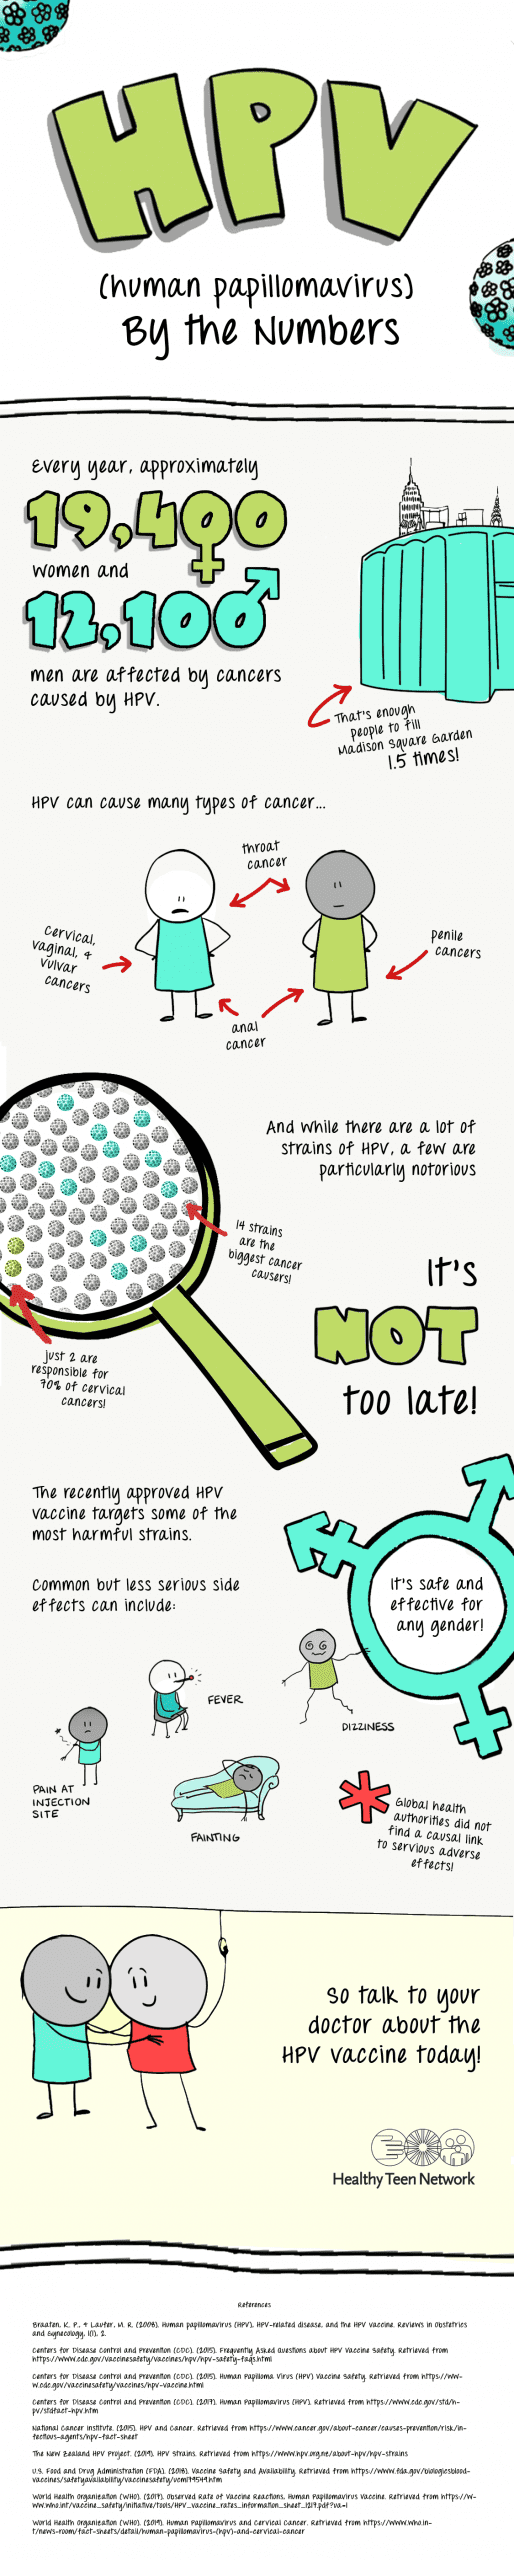 Infographic about HPV and HPV vaccine